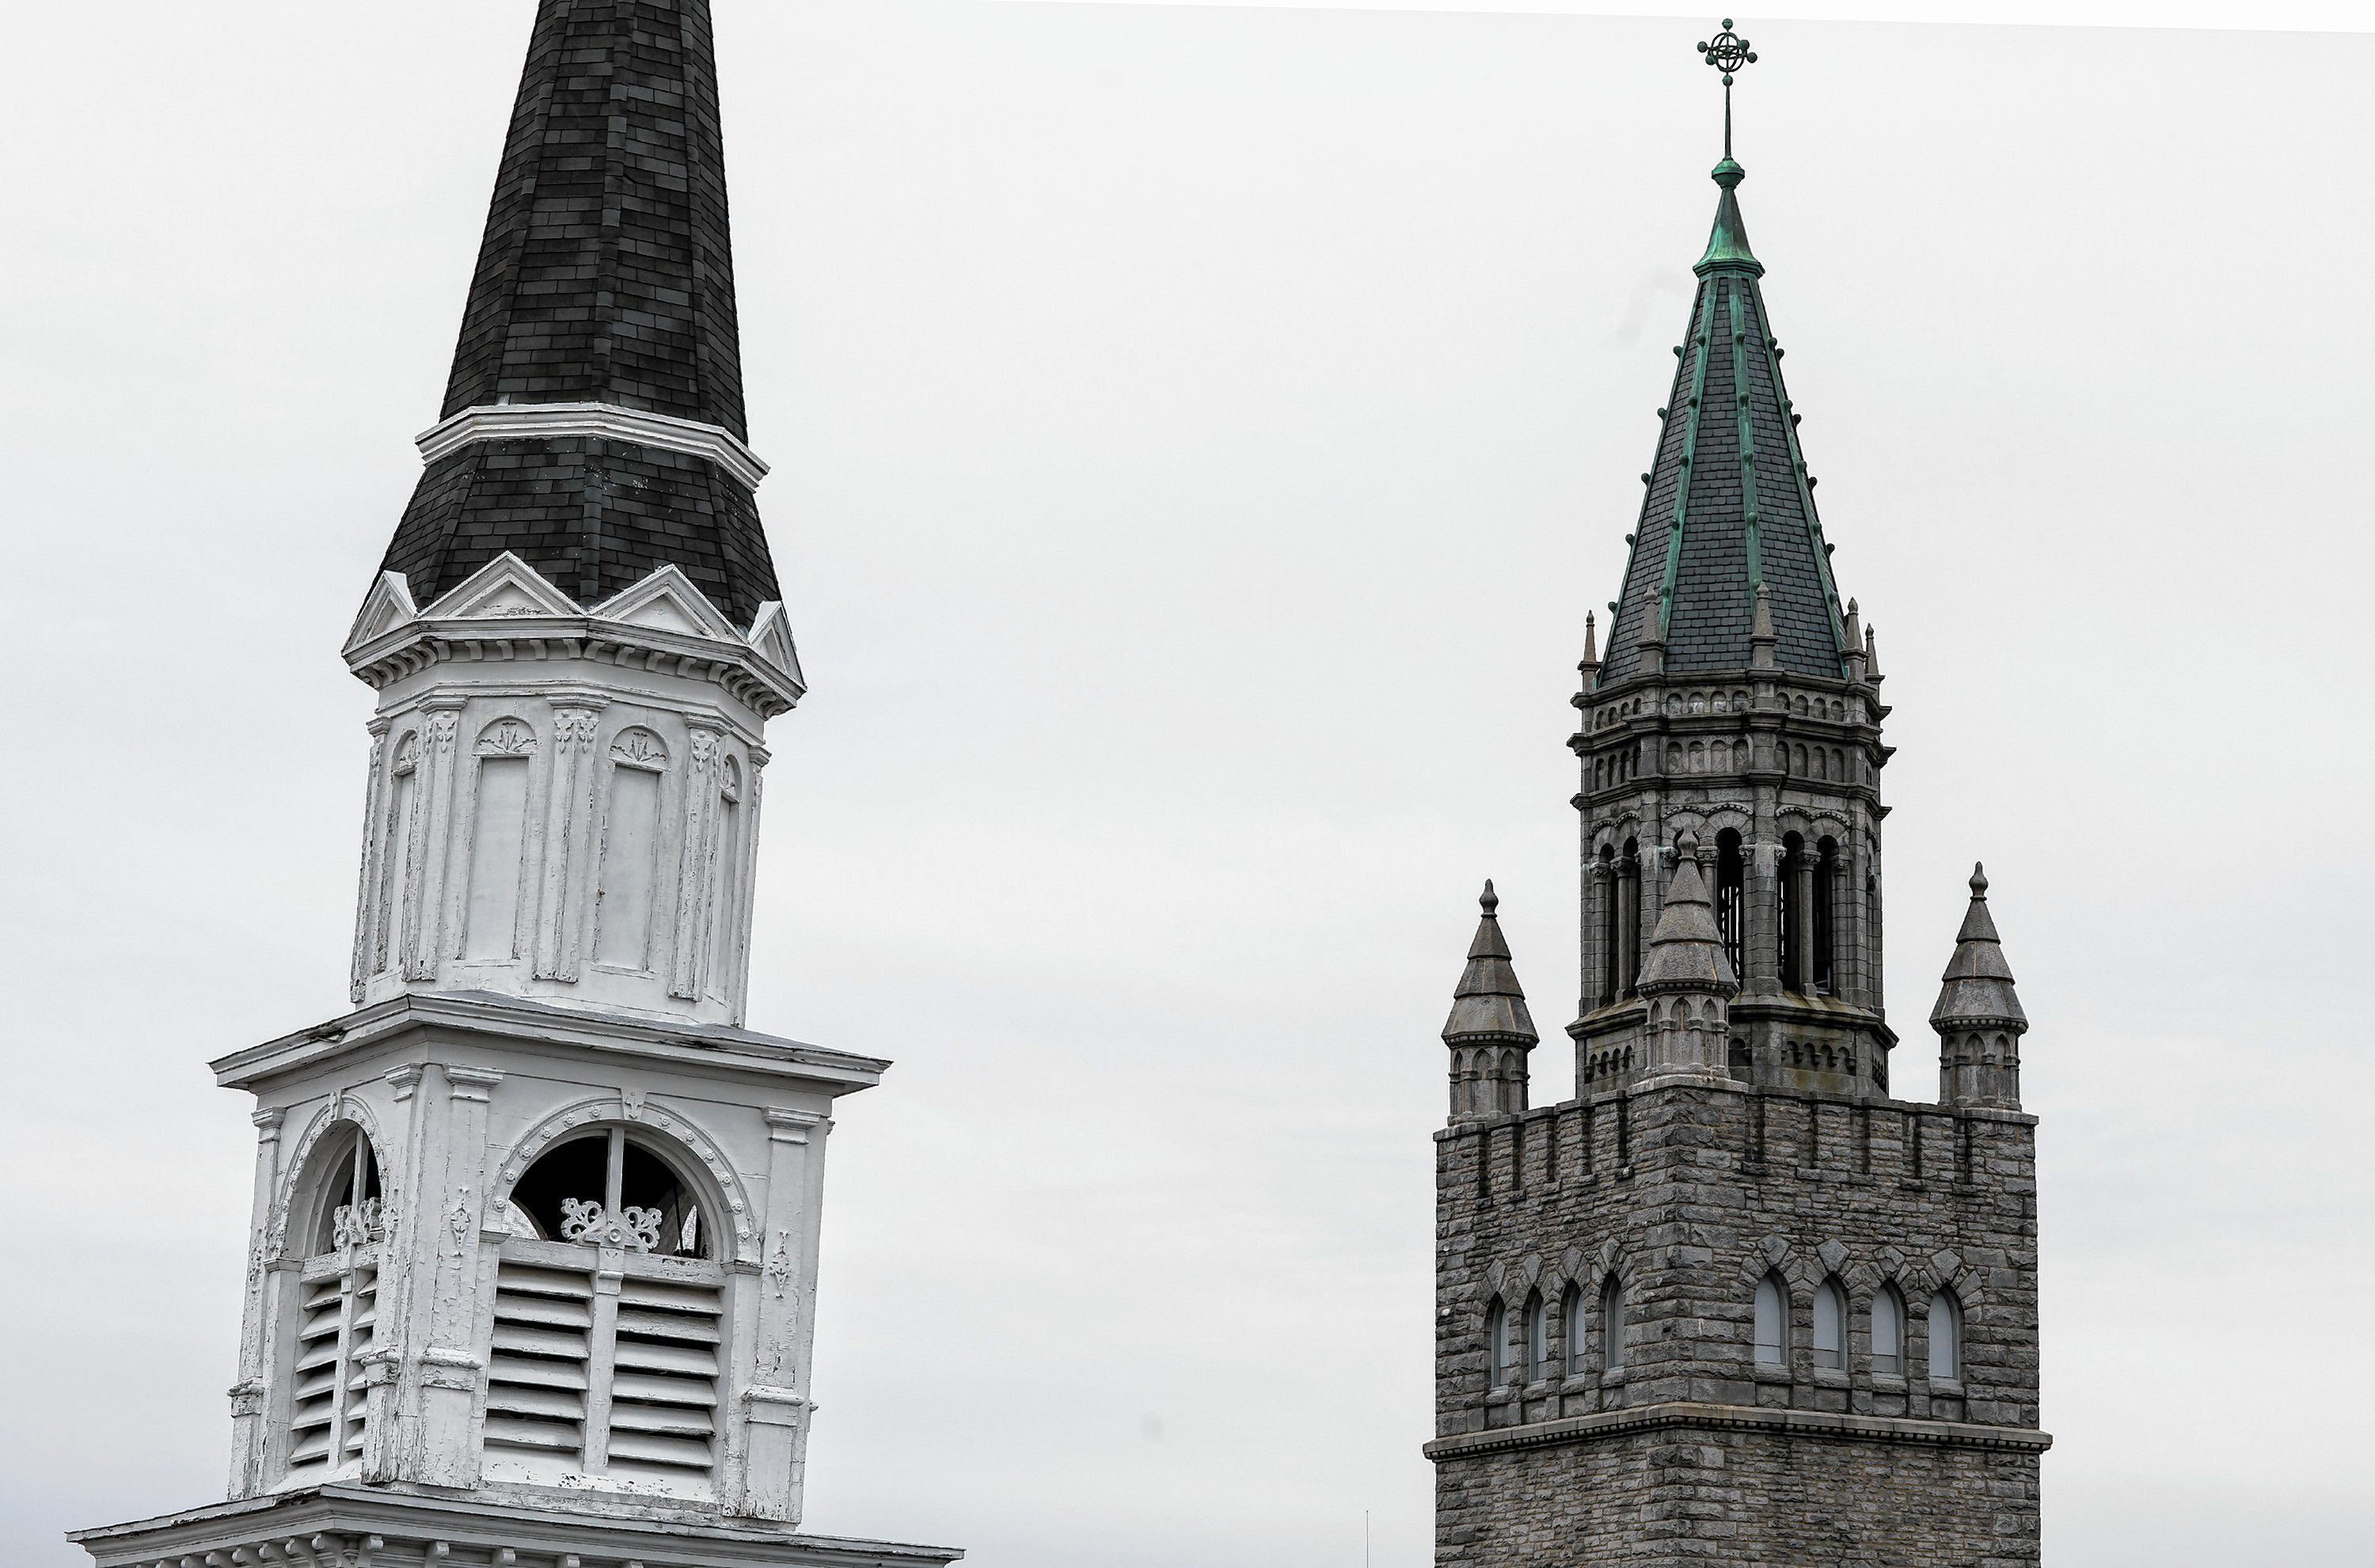 The steeples from Centerpoint Baptist Church (left) and The First Church of Christ, Scientist in downtown Concord.